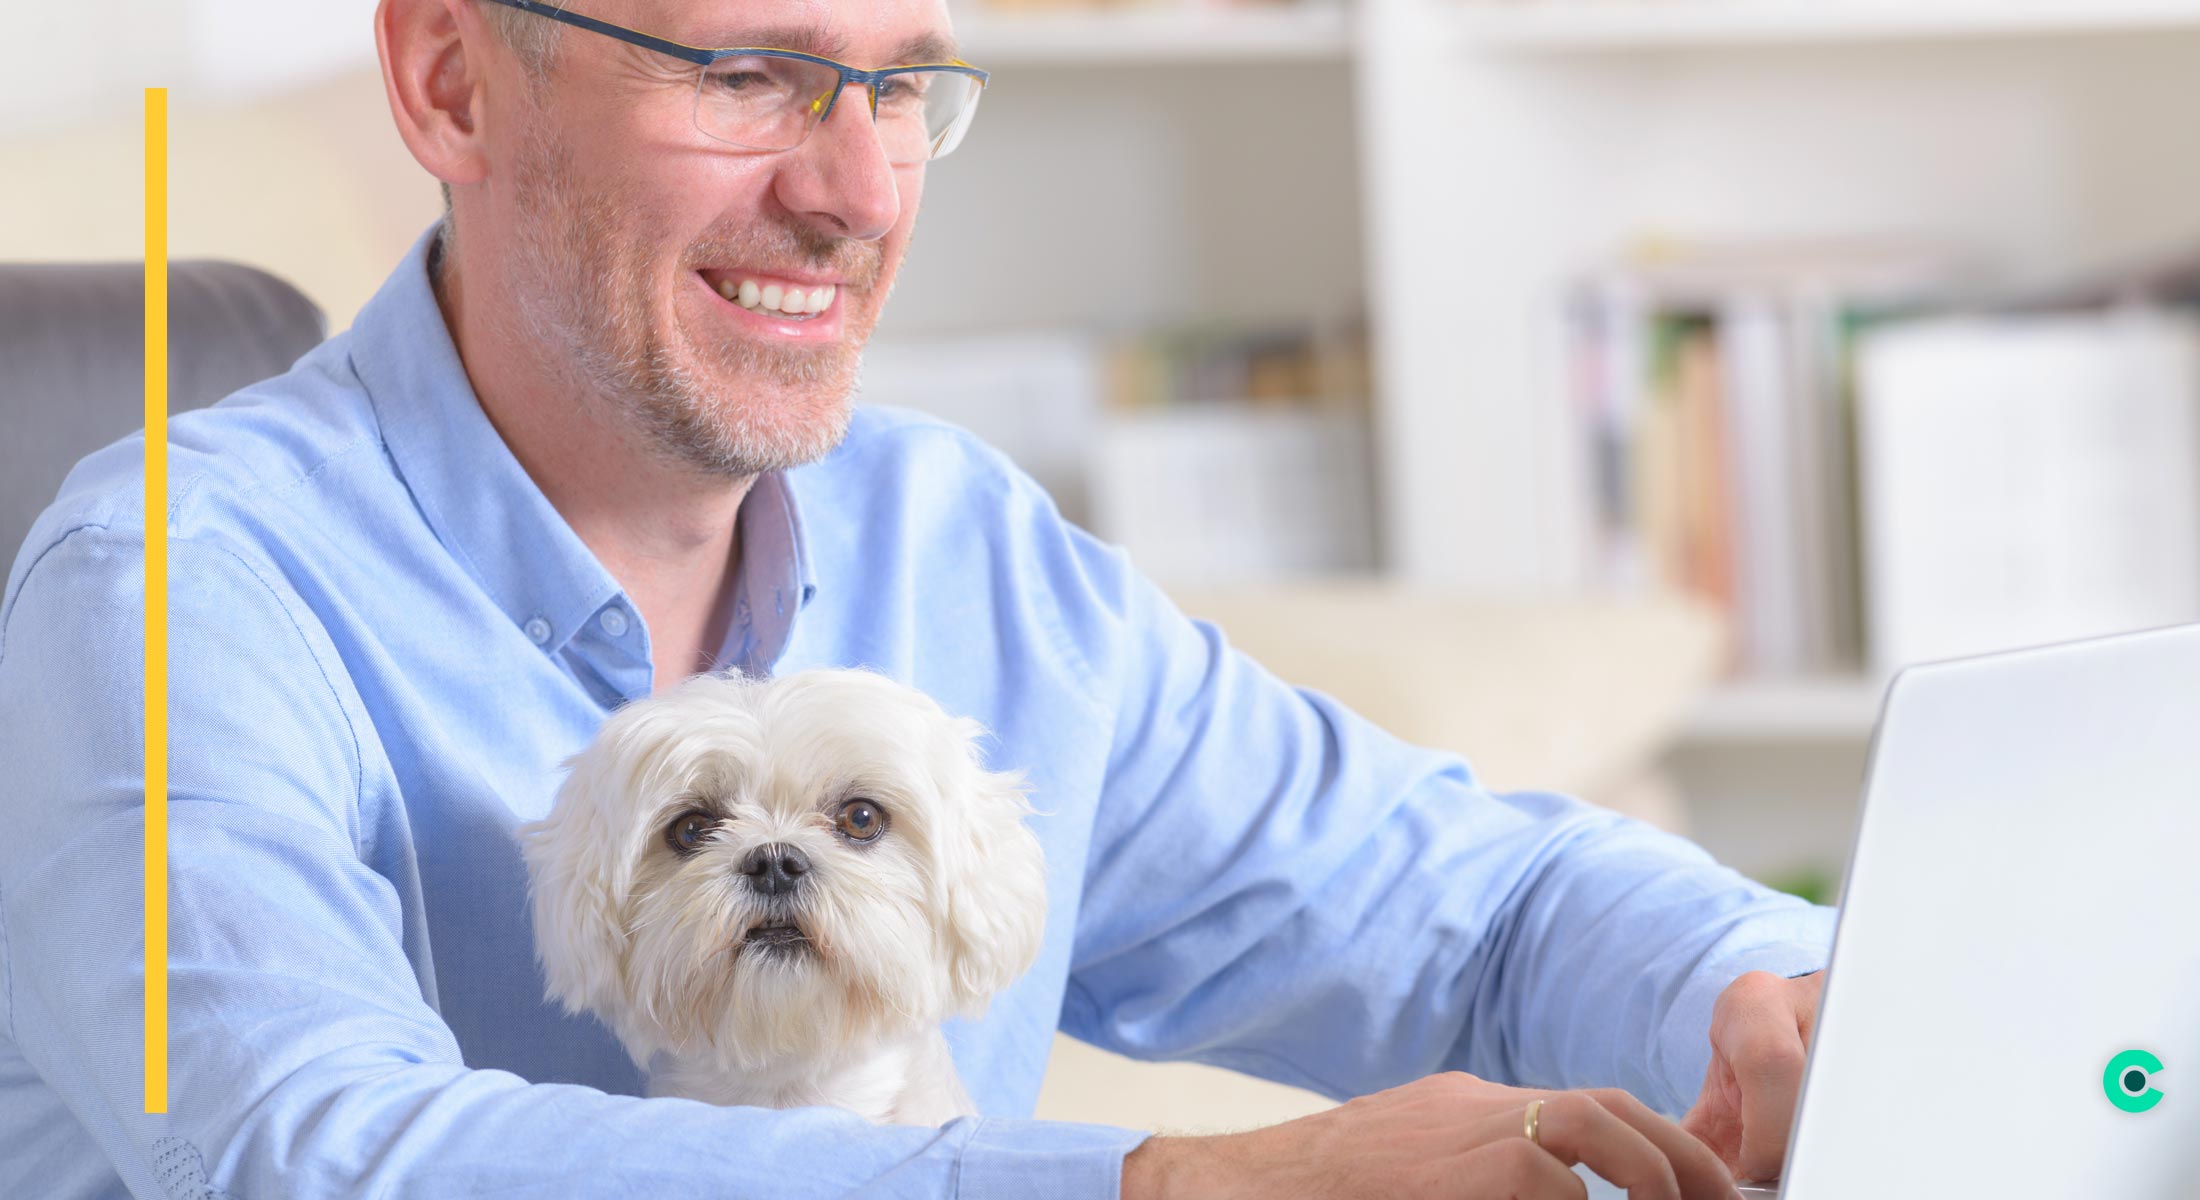 A man works on his laptop with a little white dog sitting on his lap